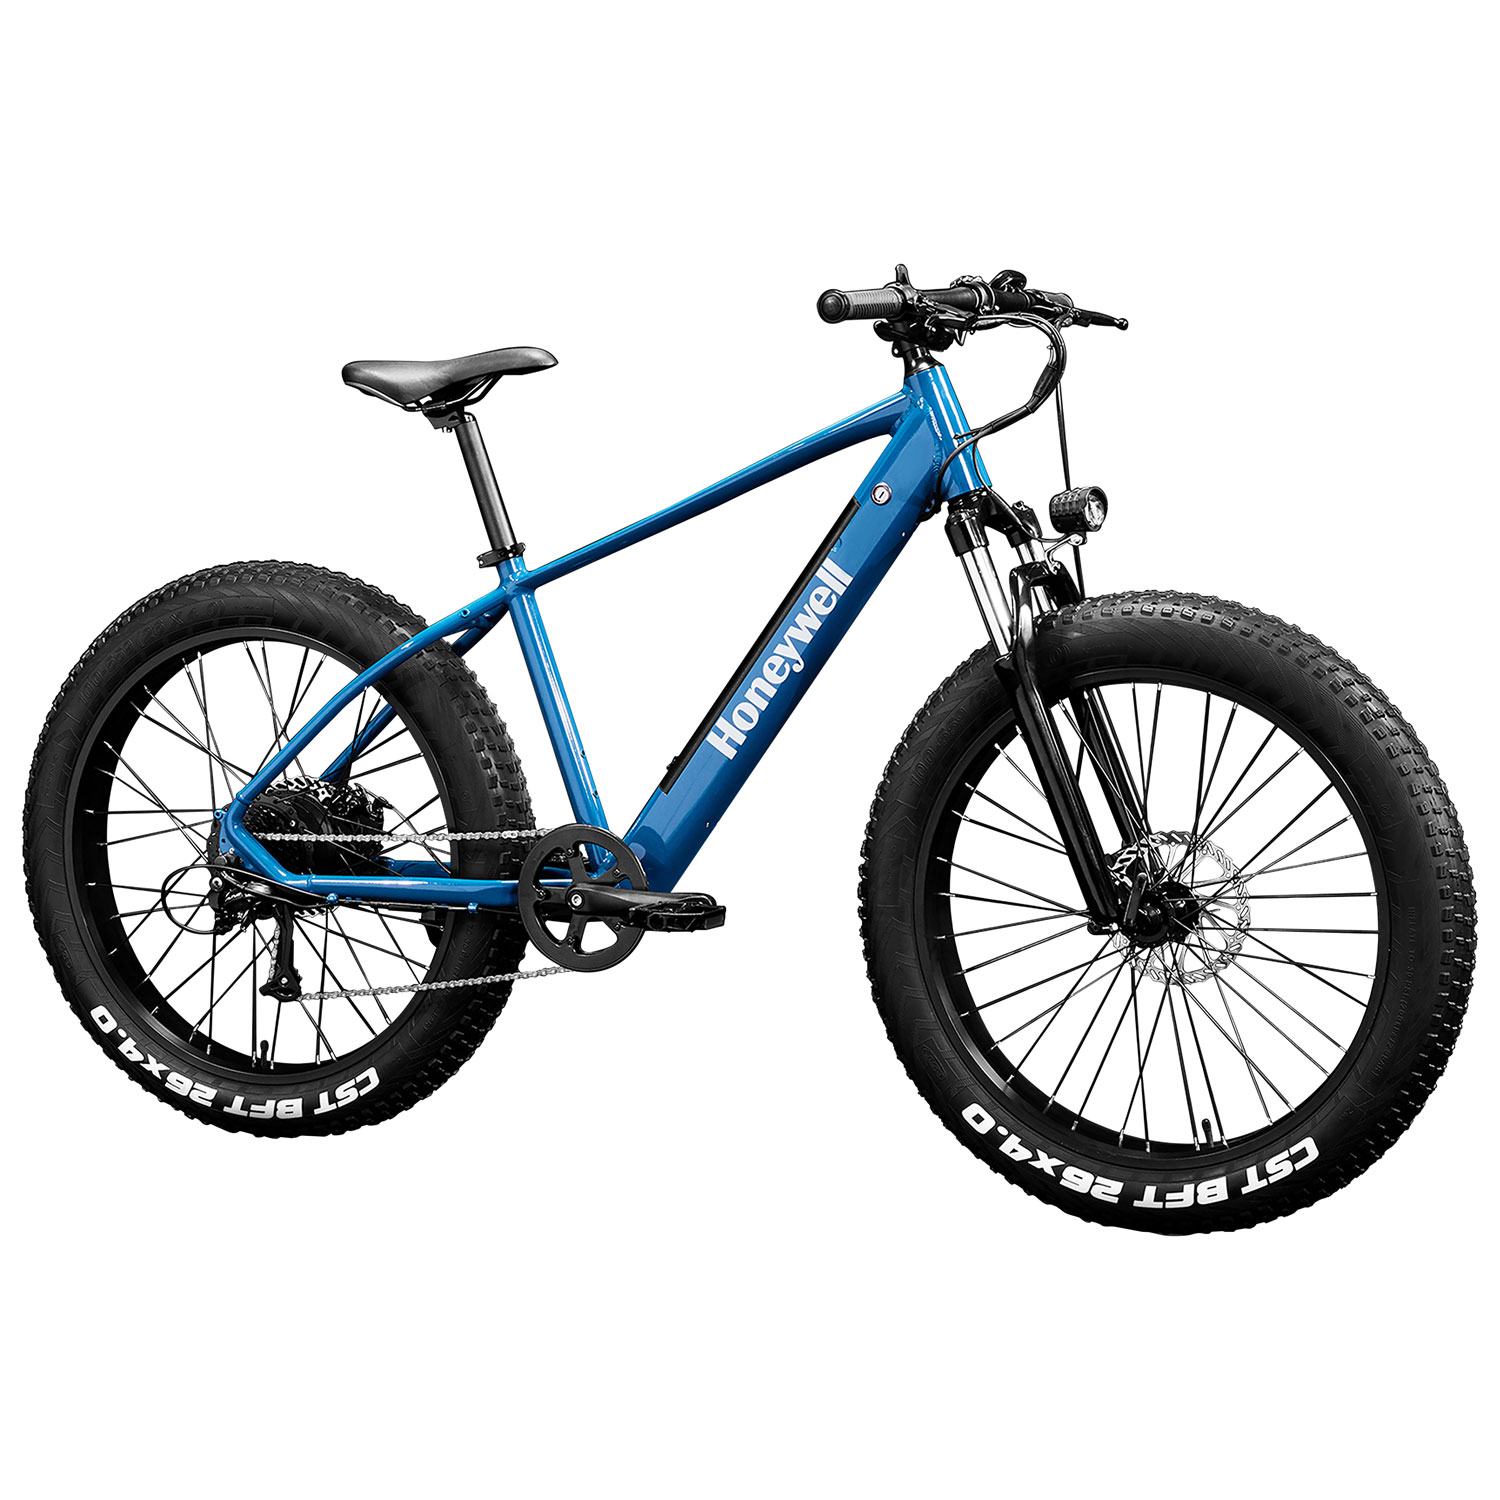 Honeywell El Capitan X 500W Fat Tire Electric City Bike with up to 64km Battery Life - Blue - Only at Best Buy